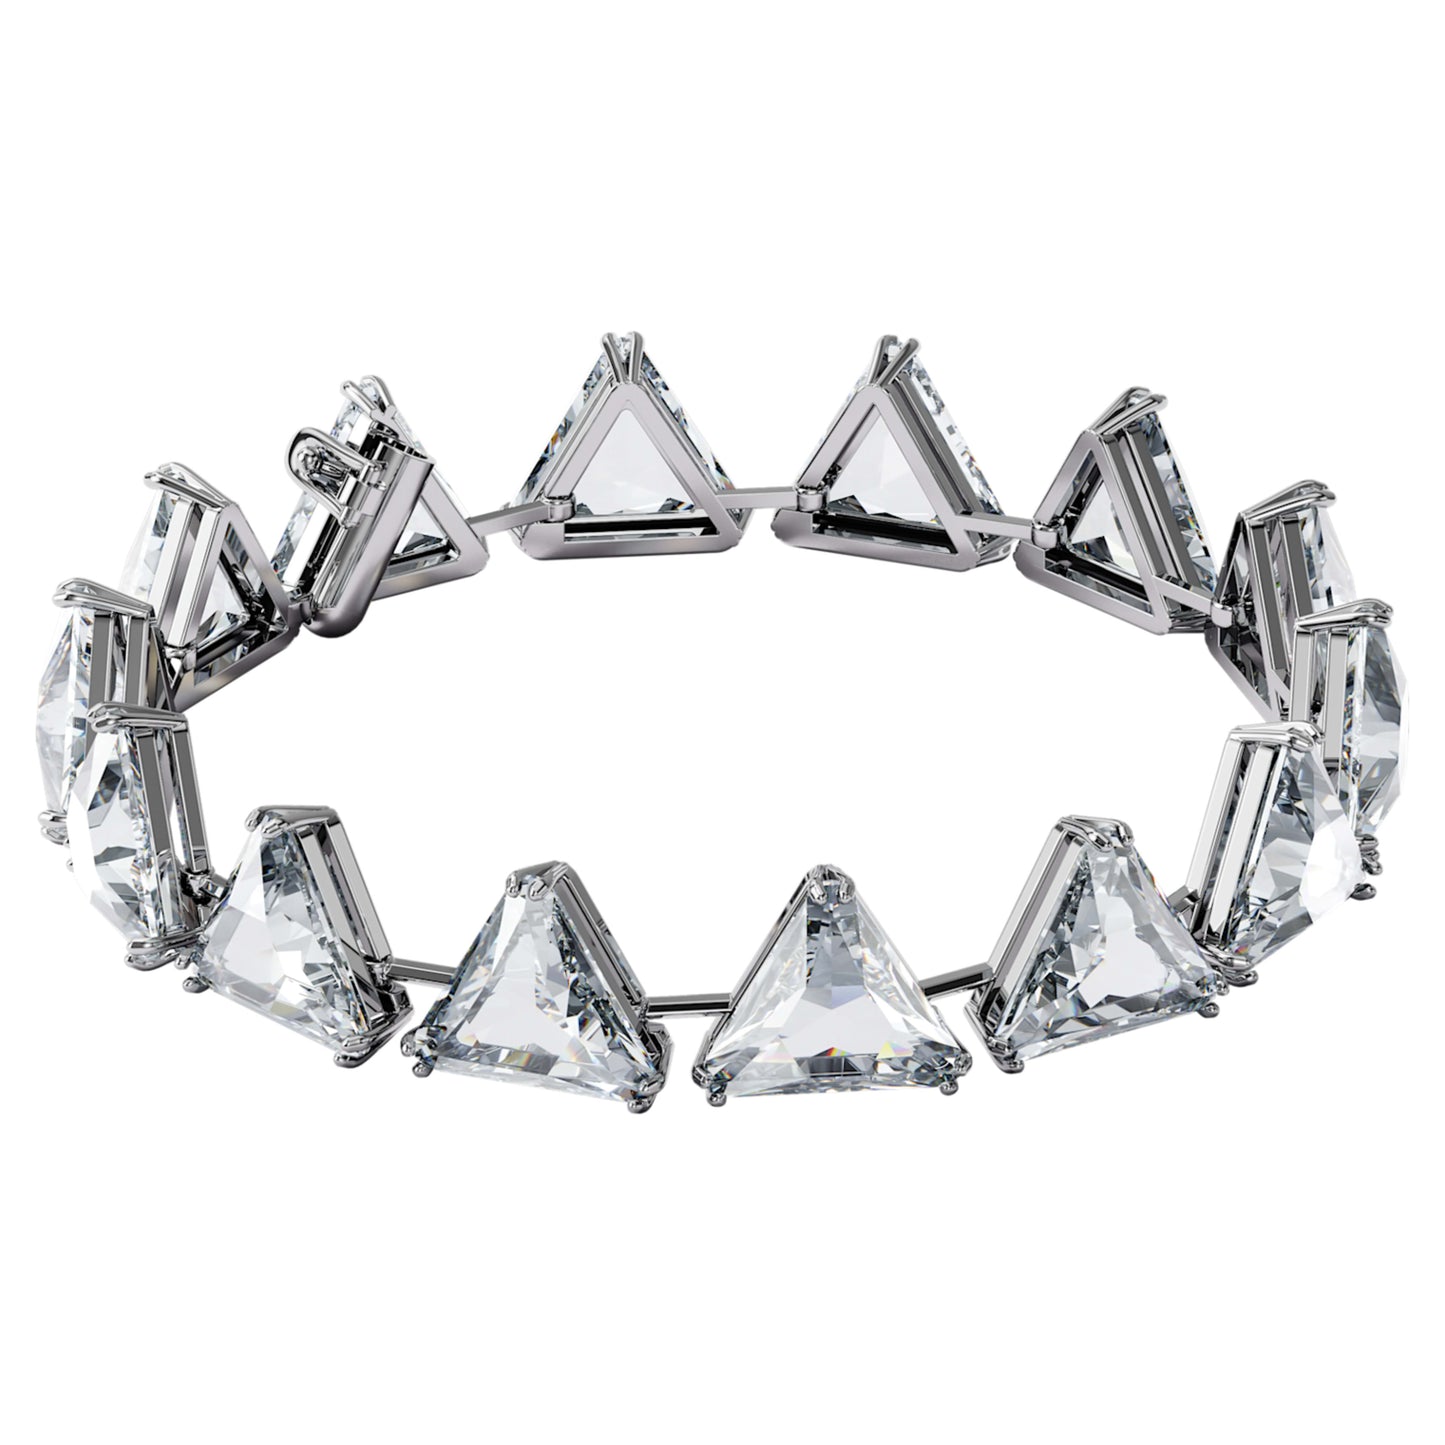 ORTYX BRACELET, SPIKE TRIANGLE CUT CRYSTALS, WHITE, RHODIUM PLATED